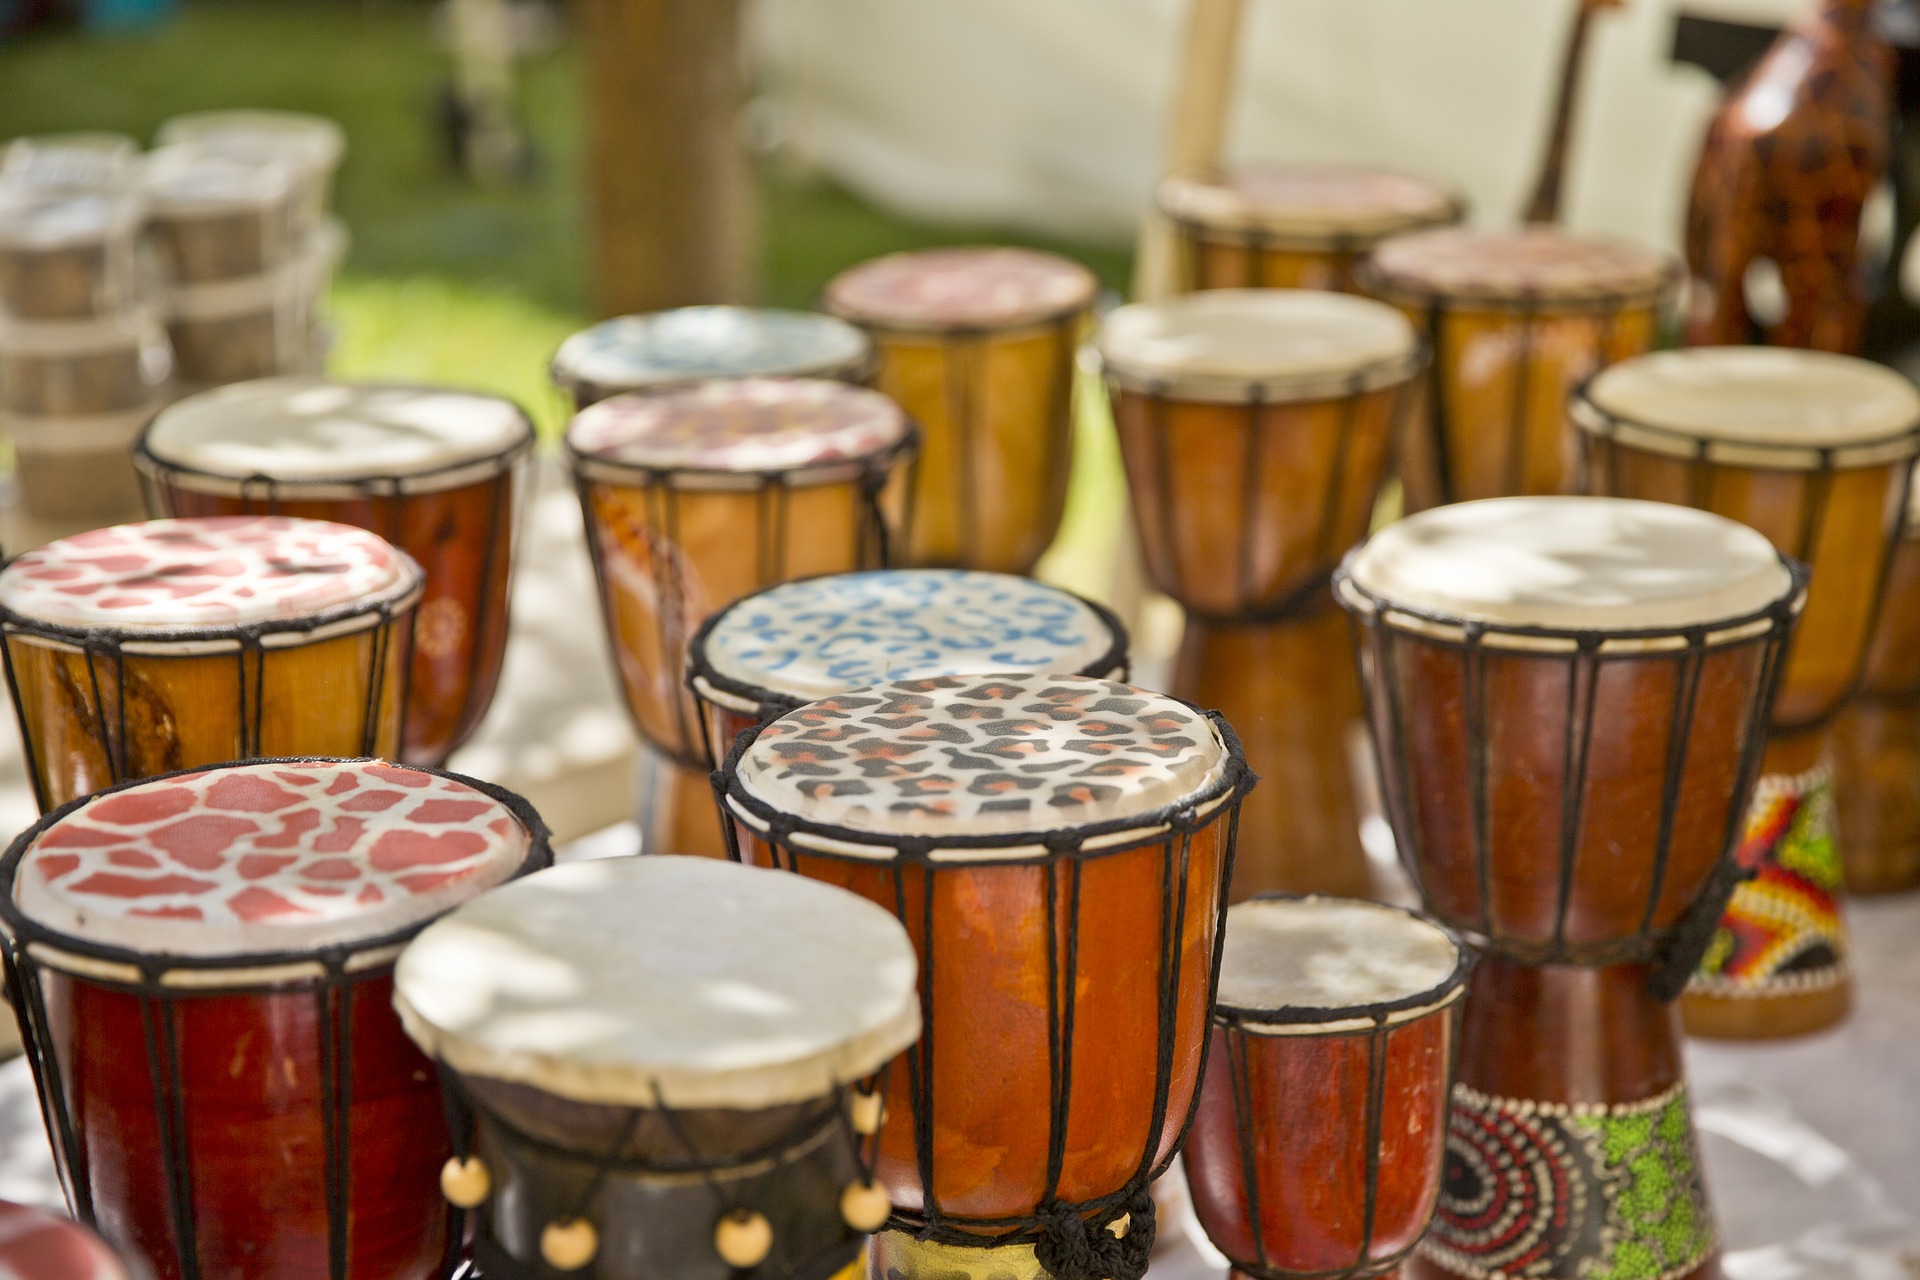 Enjoy traditional African storytelling with drumming, dancing, and song with Orisirisi. For children and families.